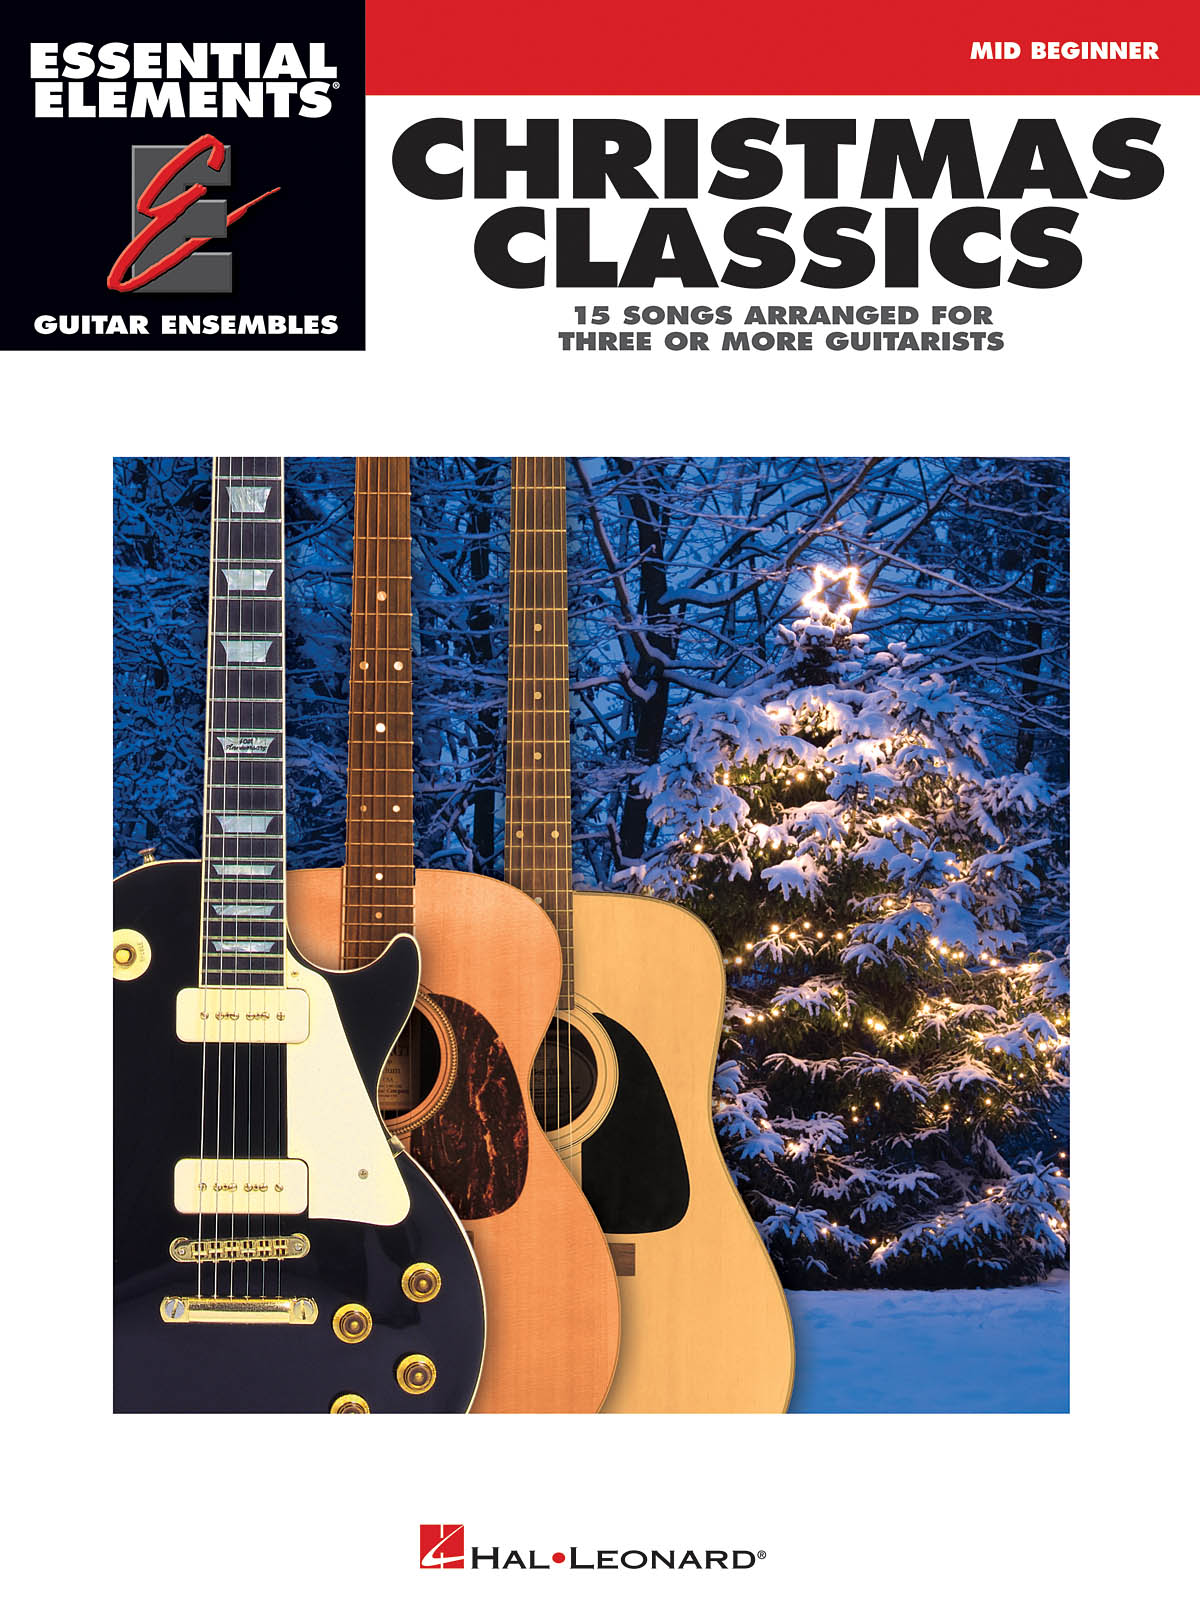 Essential Elements Guitar Ens - Christmas Classics - 15 Songs Arranged for Three of More Guitarists